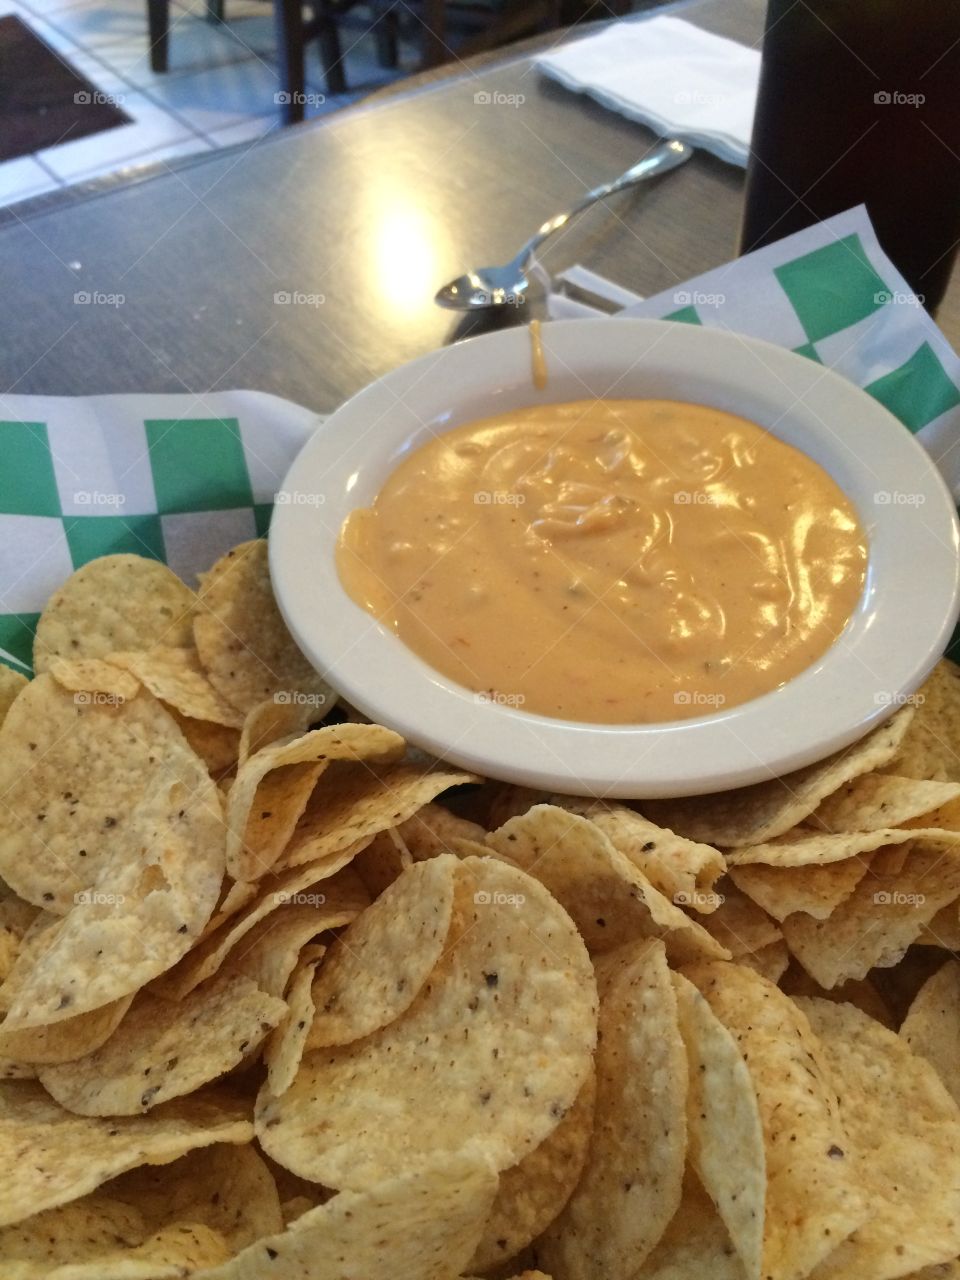 Stoby's  Cheese Dip!. Great cheese dip in Conway, AR